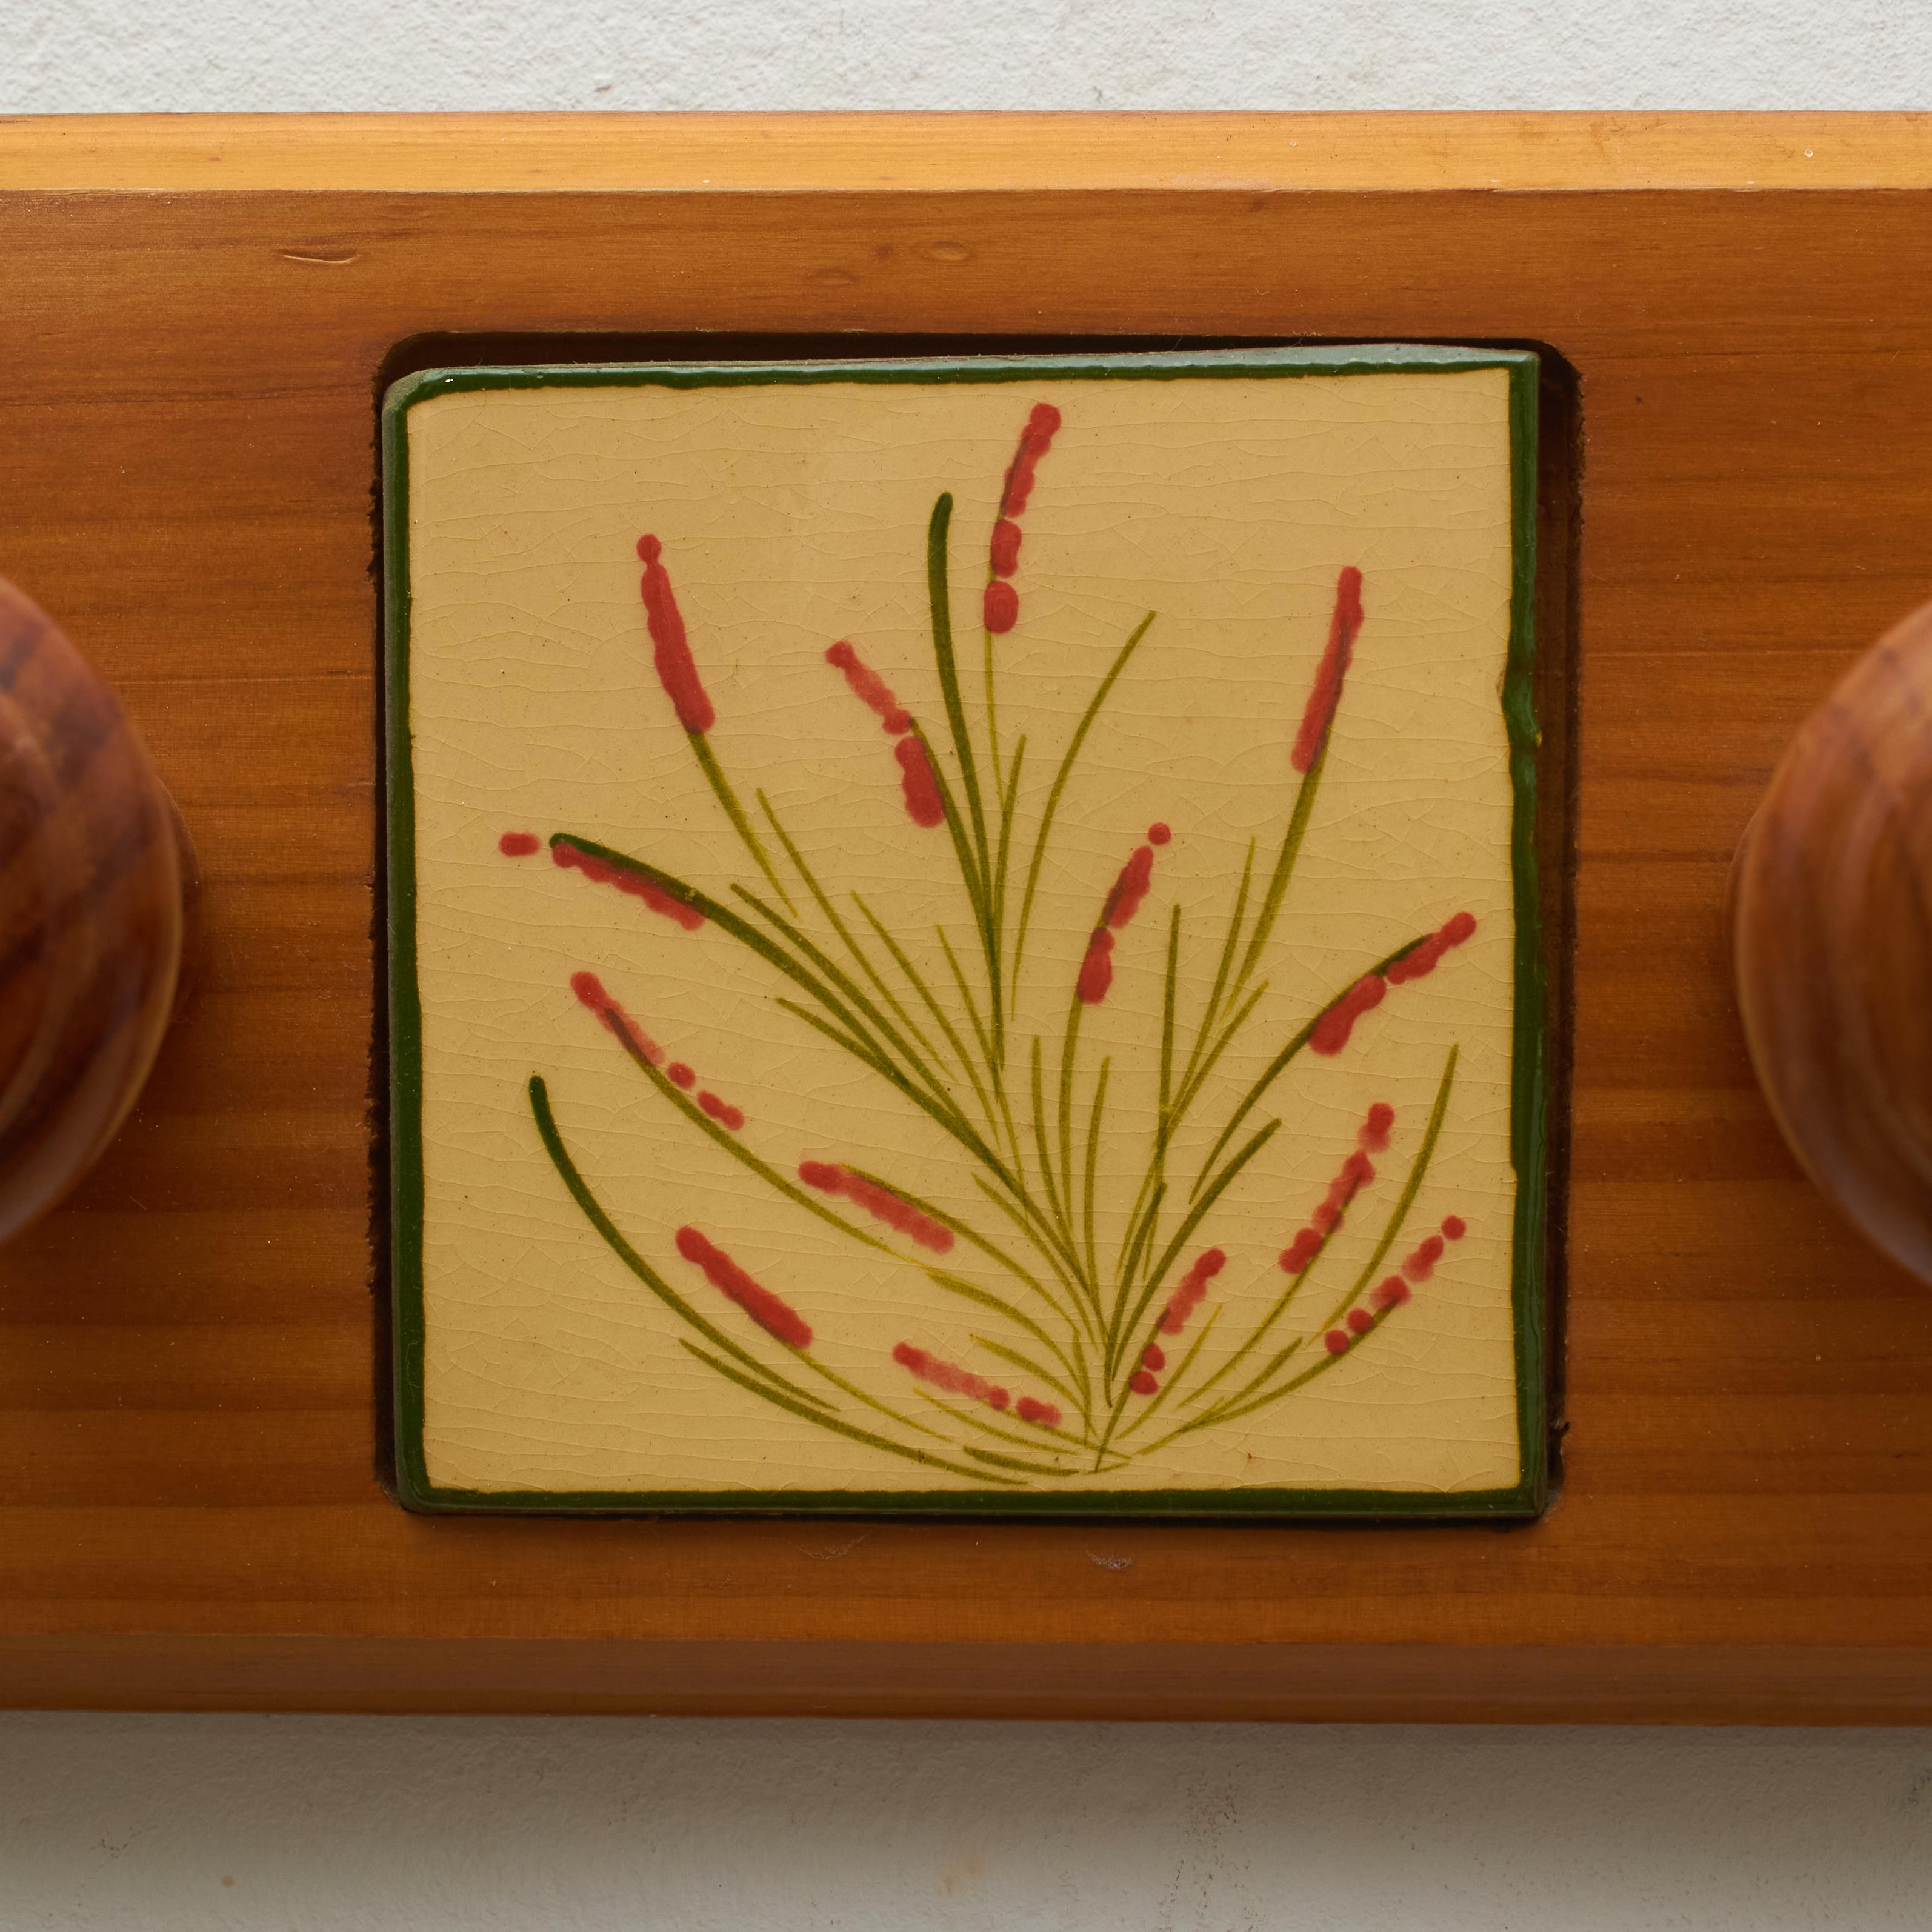 Mid-20th Century Vintage 1960 Catalan Artist Diaz Costa Hand-Painted Ceramic and Wood Hanger For Sale